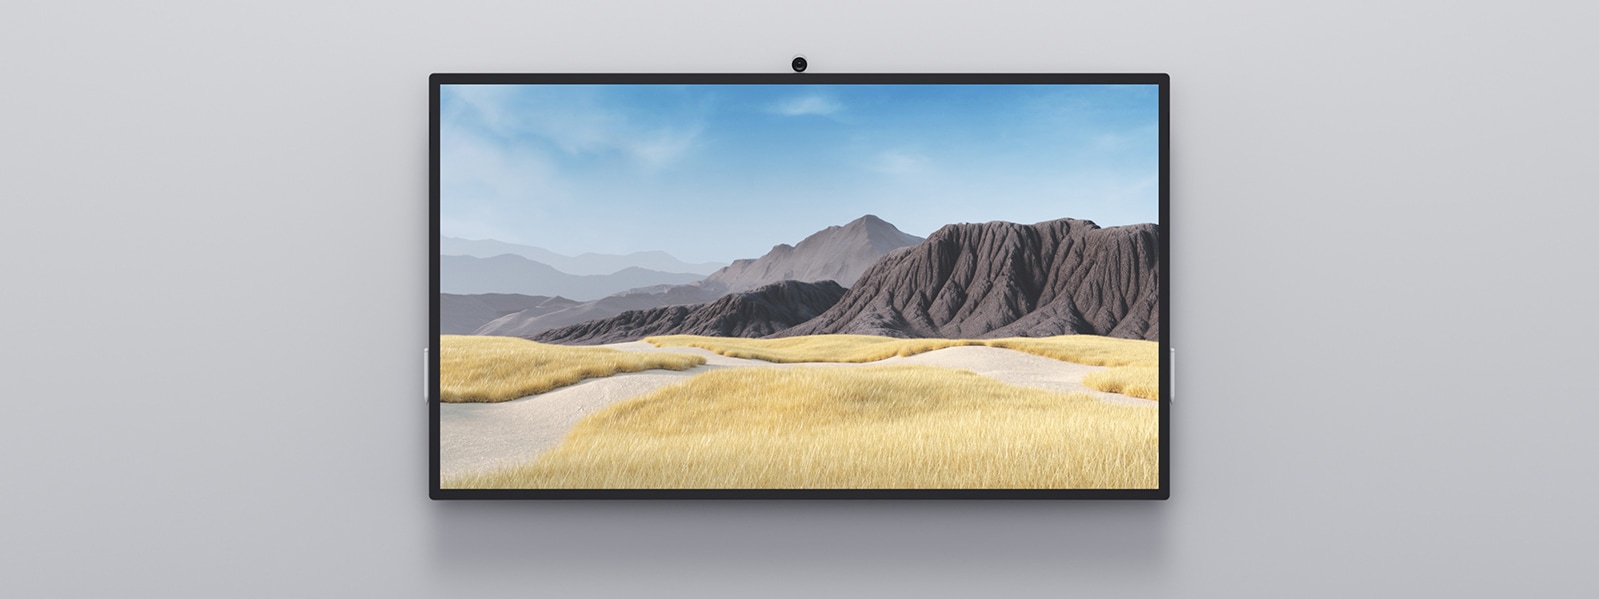 A Surface Hub 2S in the 85-inch size is observed